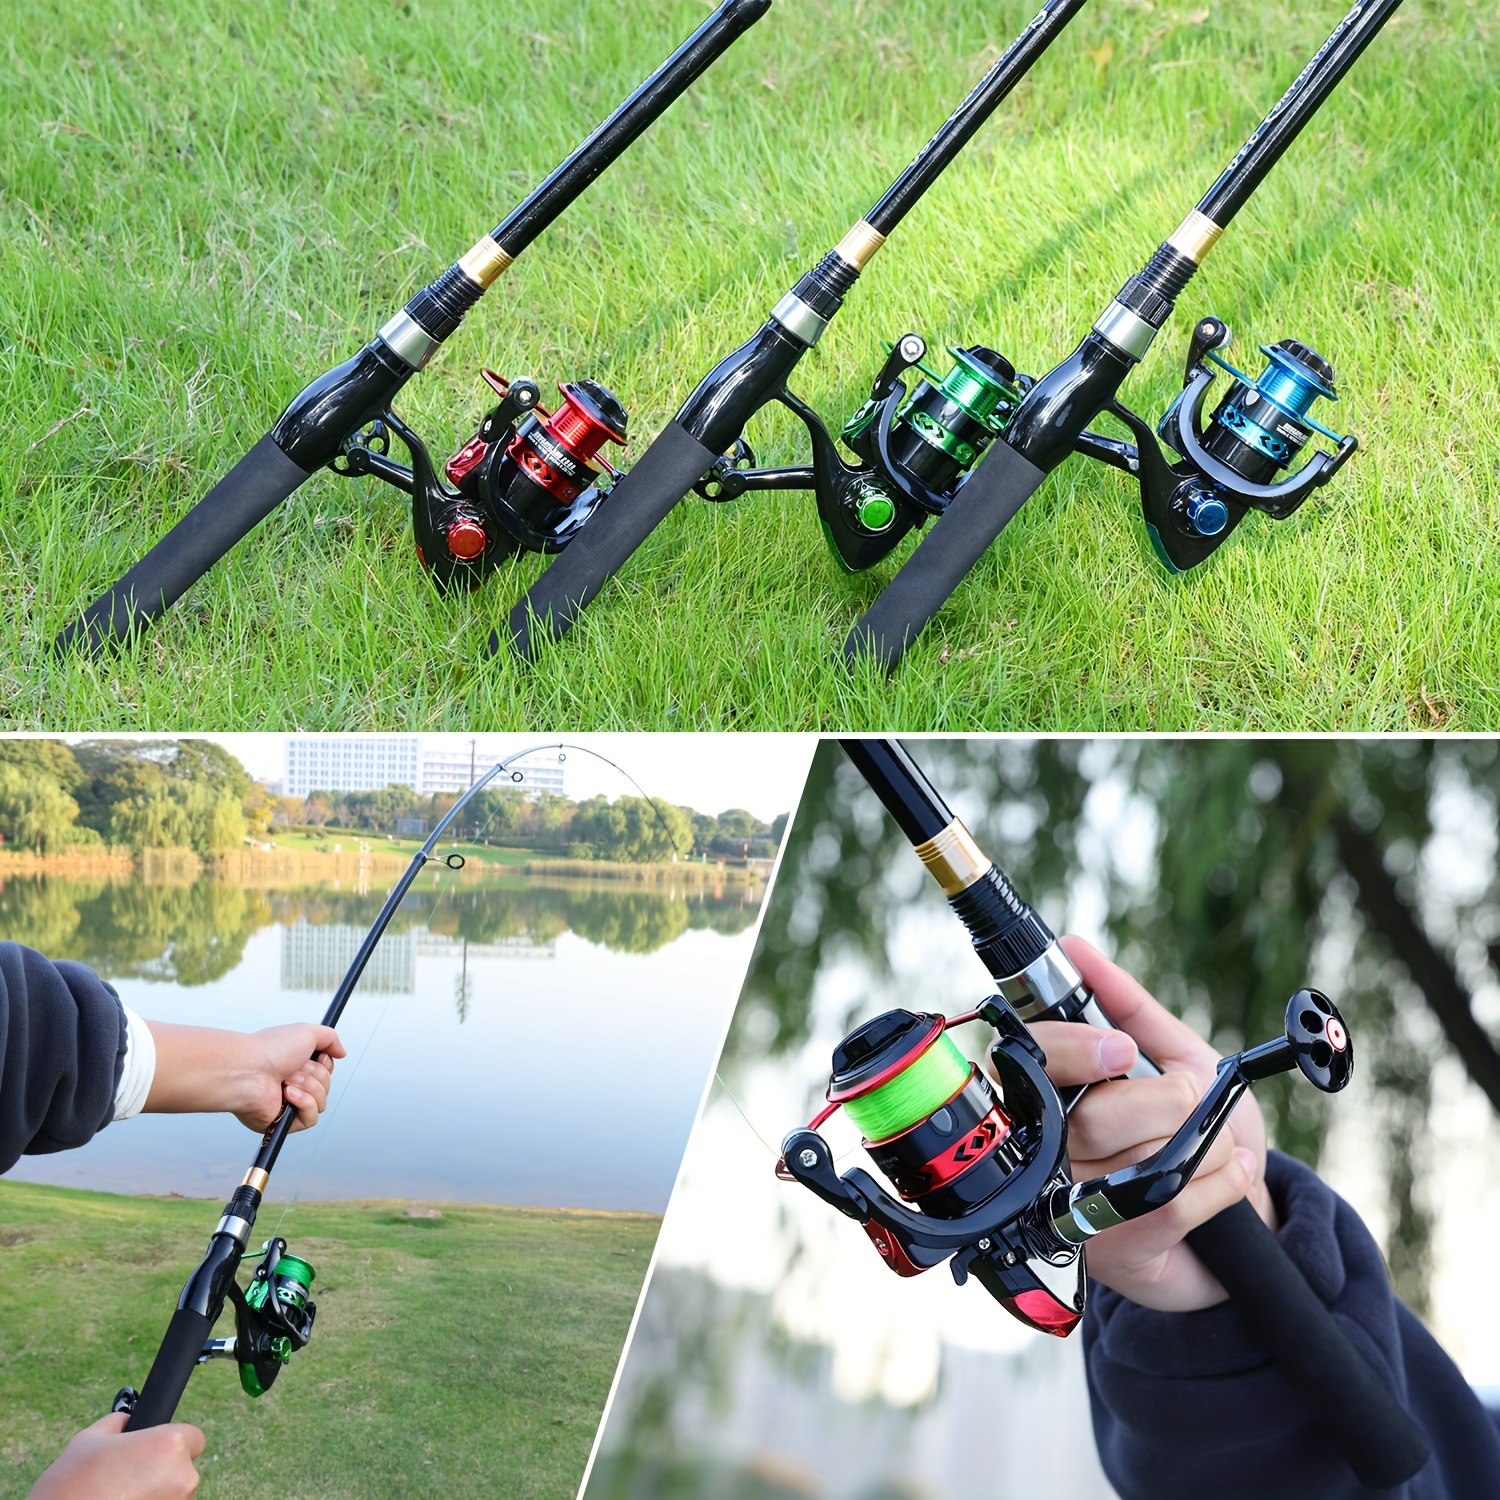 Sougayilang Telescopic Fishing Rod and Reel Combos Full Kit, Carbon Fiber  Fishing Pole, 13 +1 Shielded Bearings Stainless Steel BB Spinning Reel with